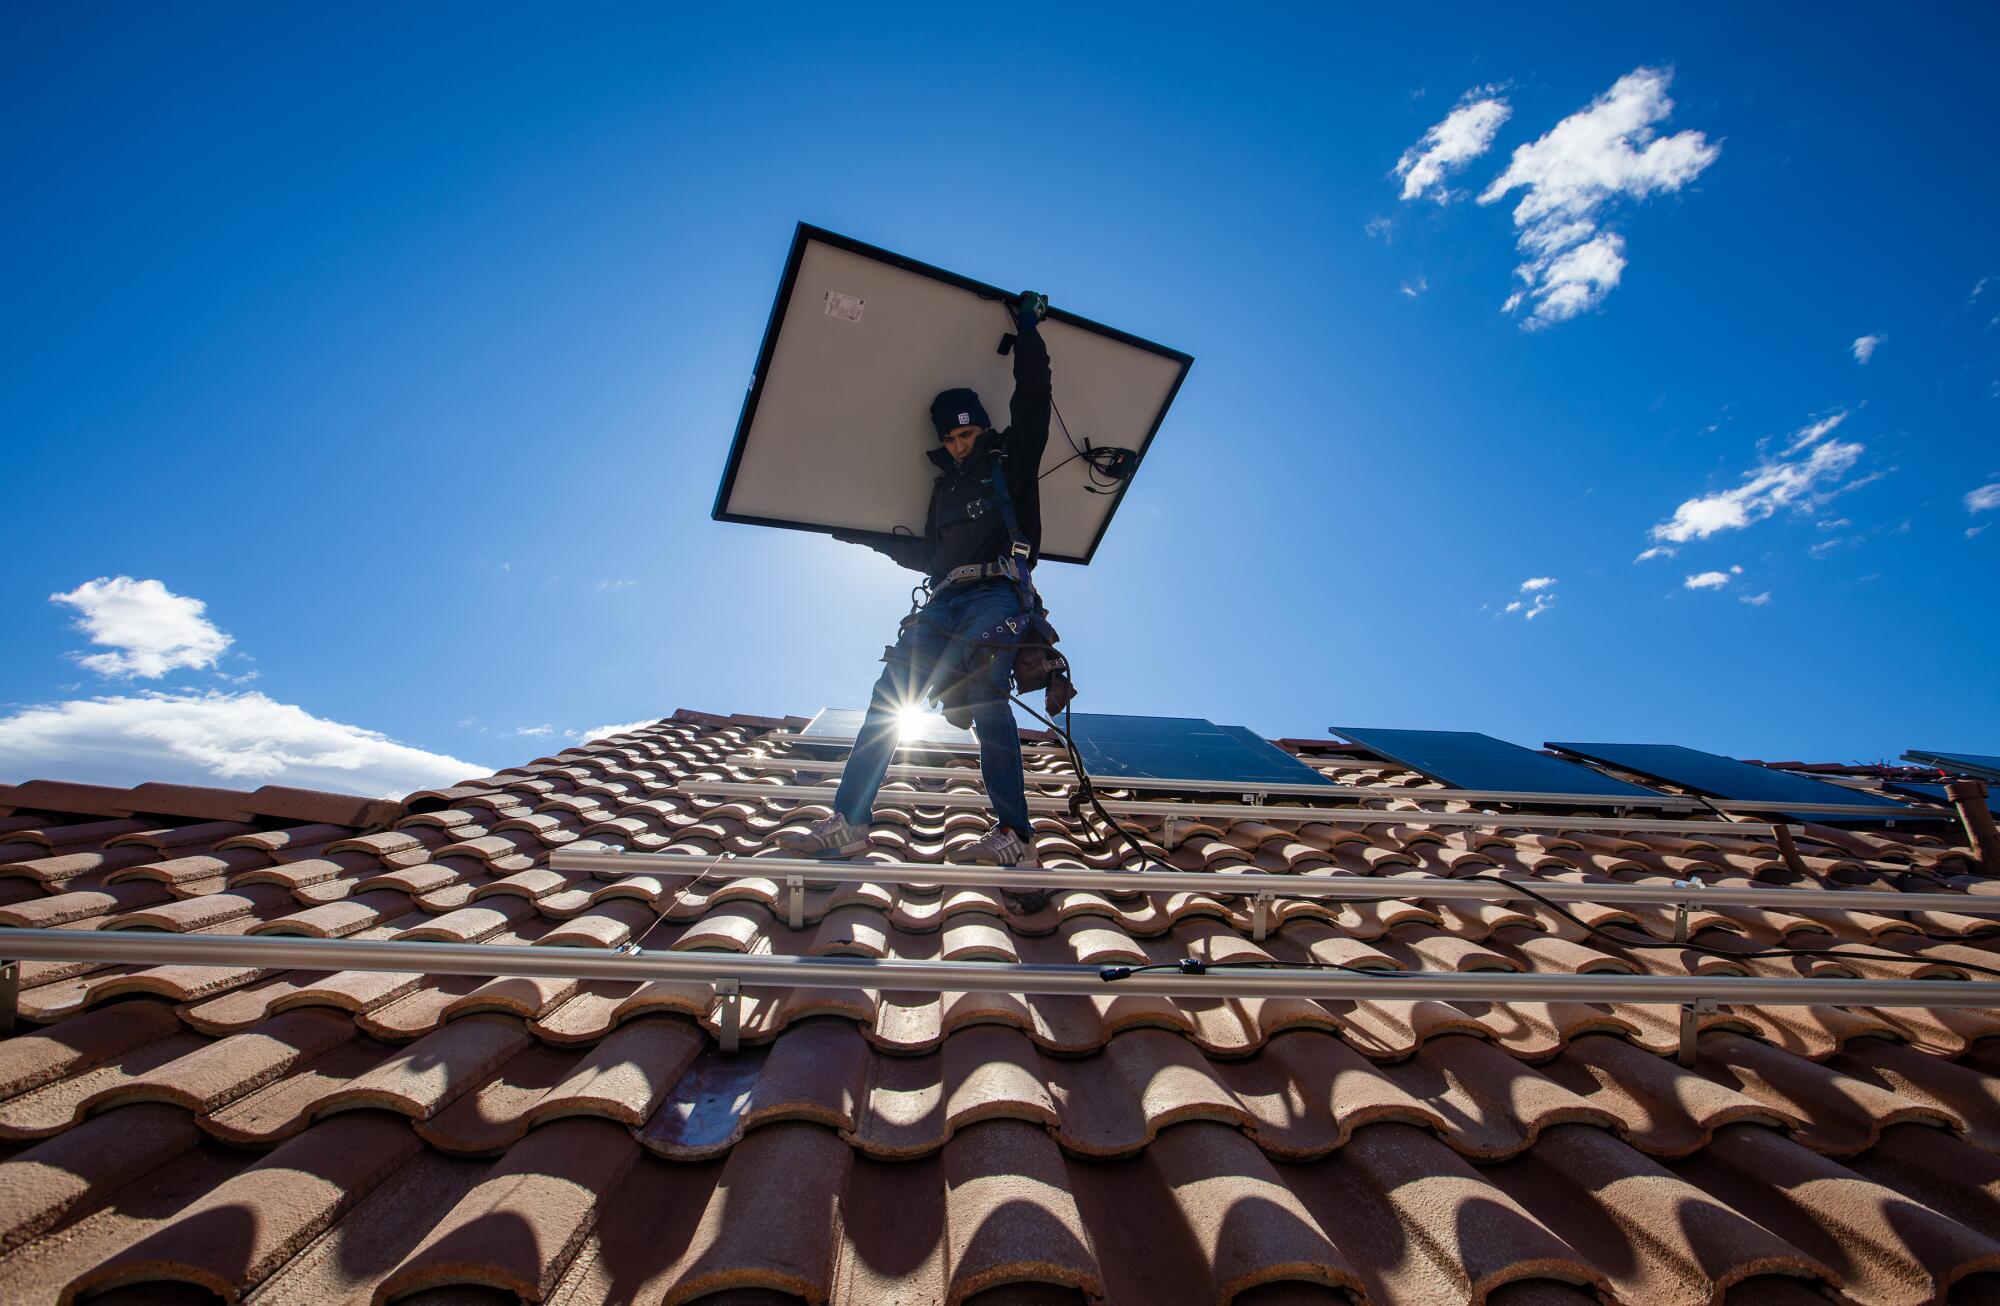 A Sunrun employee installs solar panels on a roof in North Las Vegas.